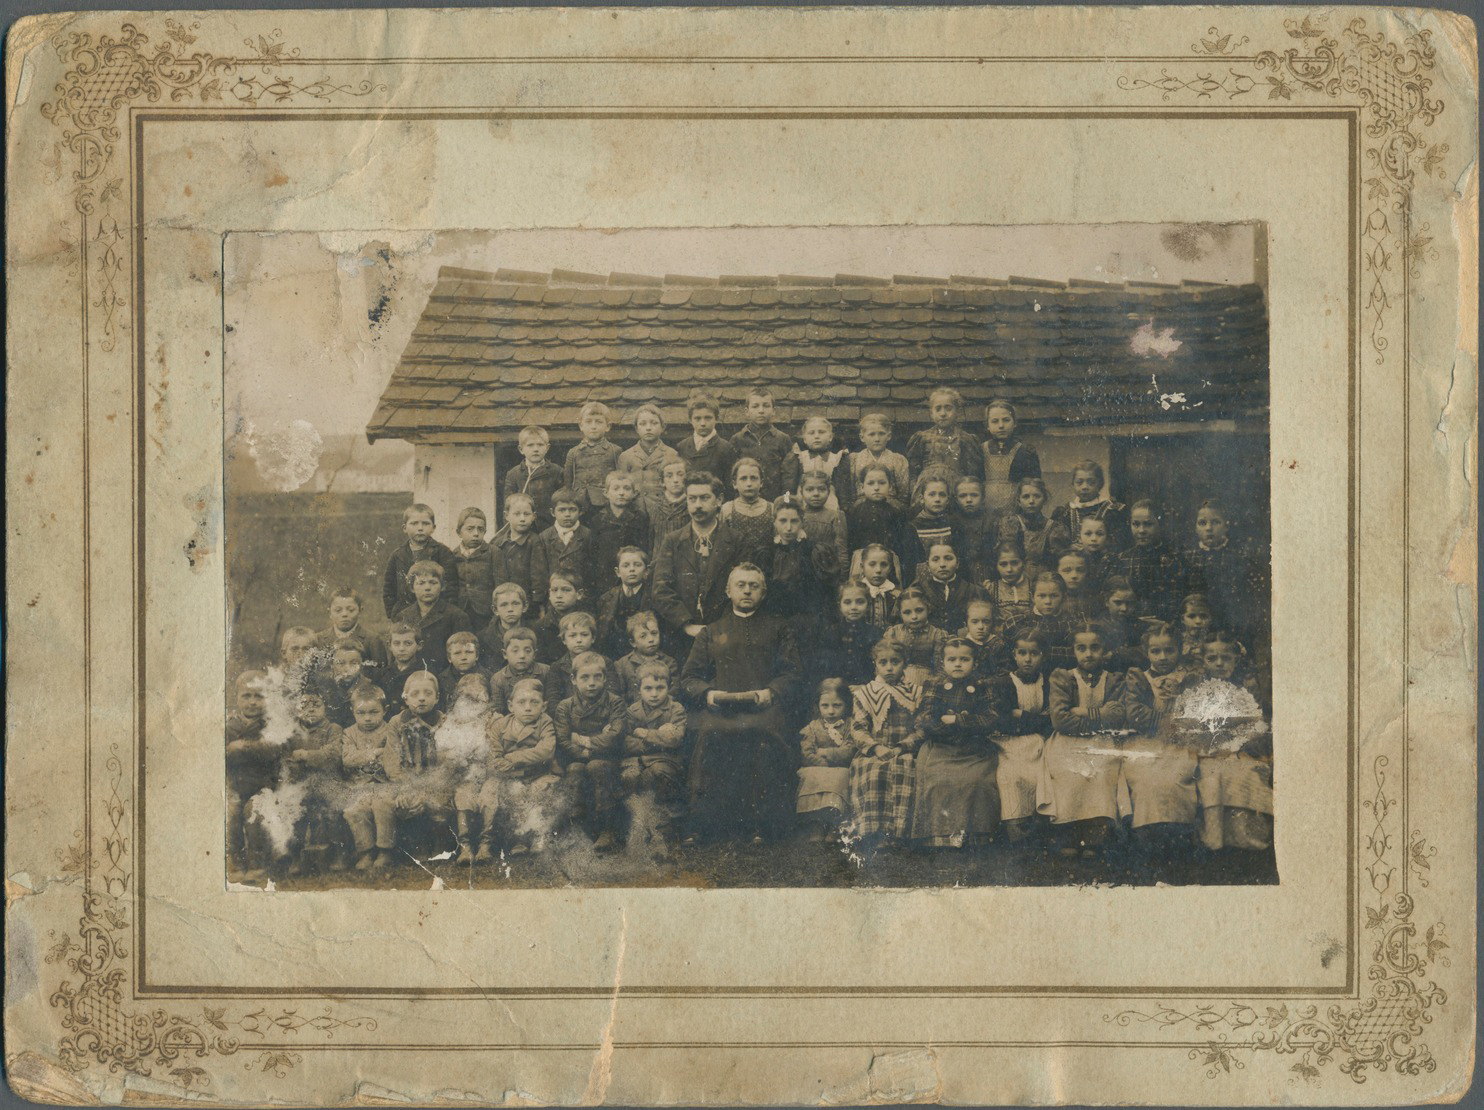 Adolf Hitler at the age of 6 (4th from the left on the top row) with his classmates in Fischlham, Austria-Hungary